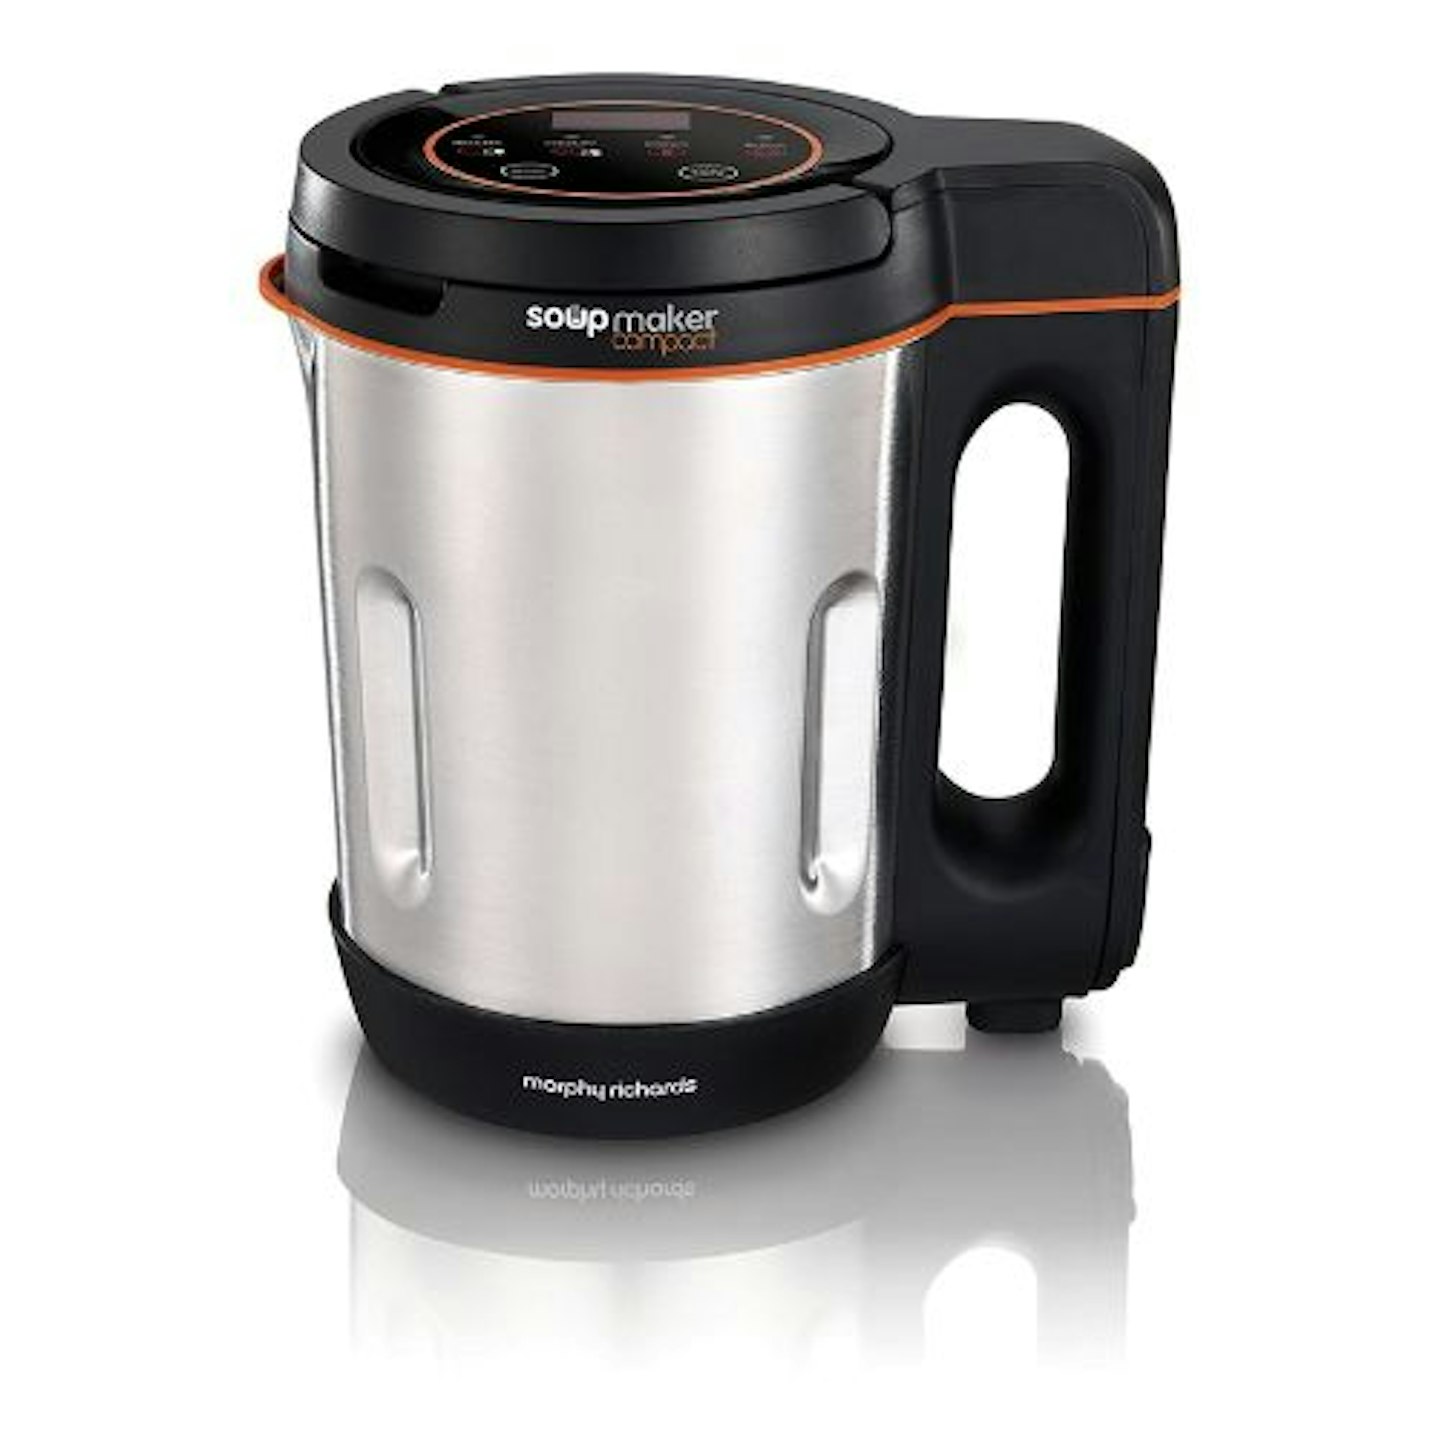 Shop Salter Digital Soup & Smoothie Maker with 5 Settings